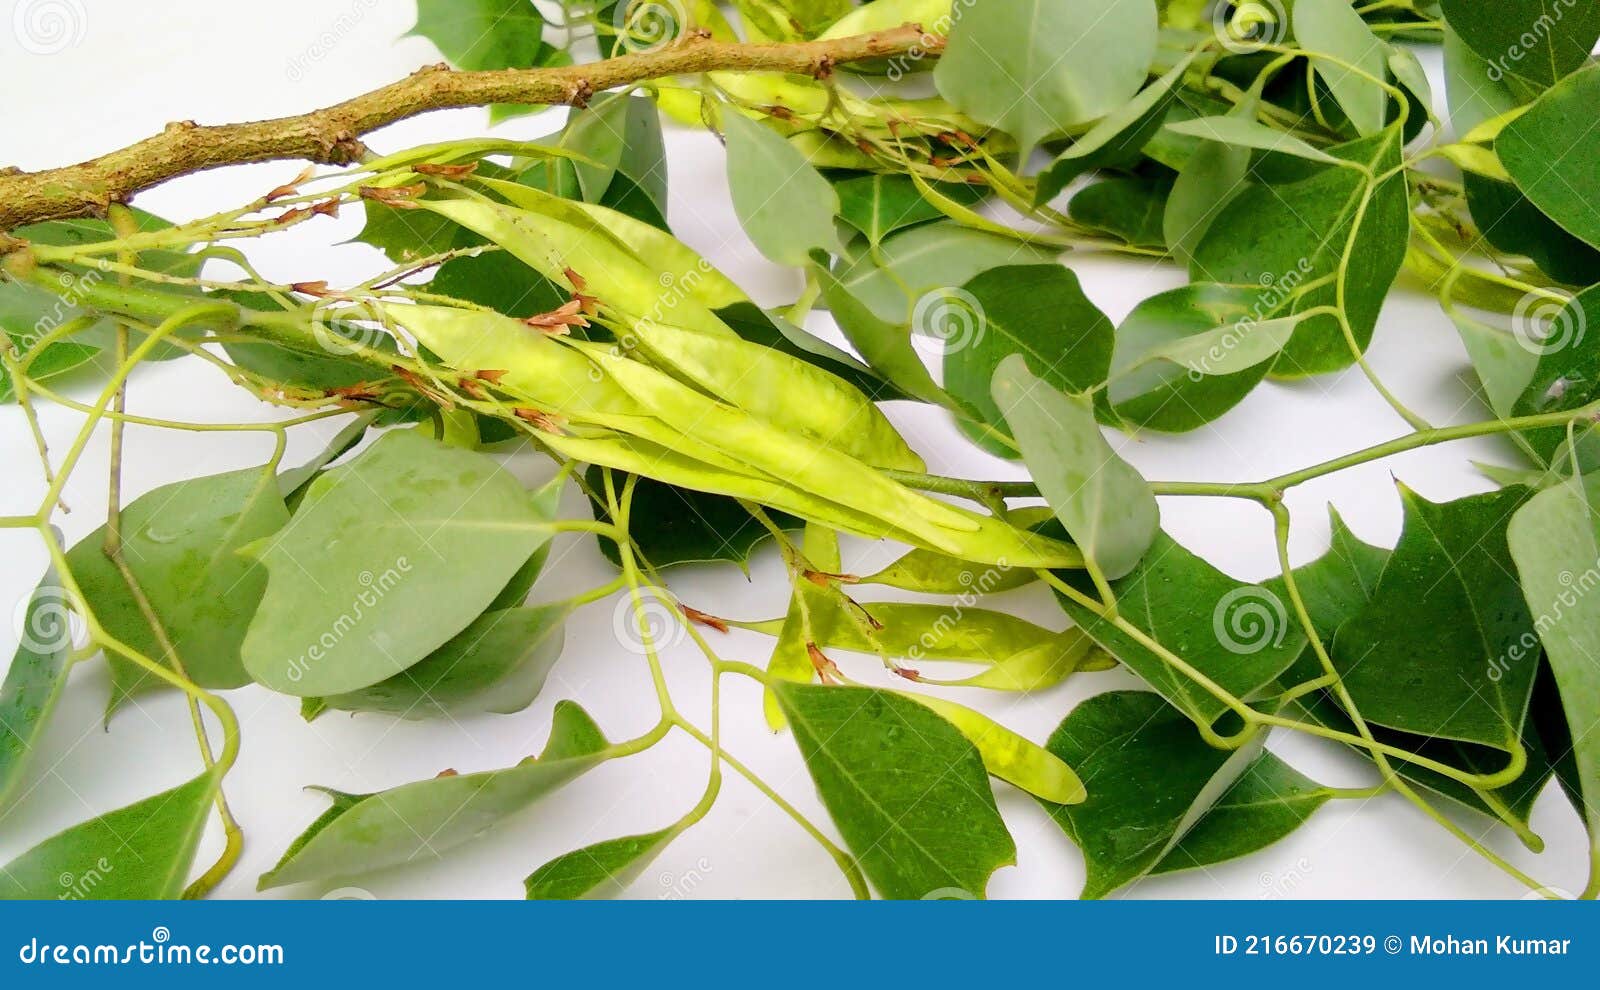 Dalbergia Or Rosewood Plant With Seed Stock Image Image Of Forest